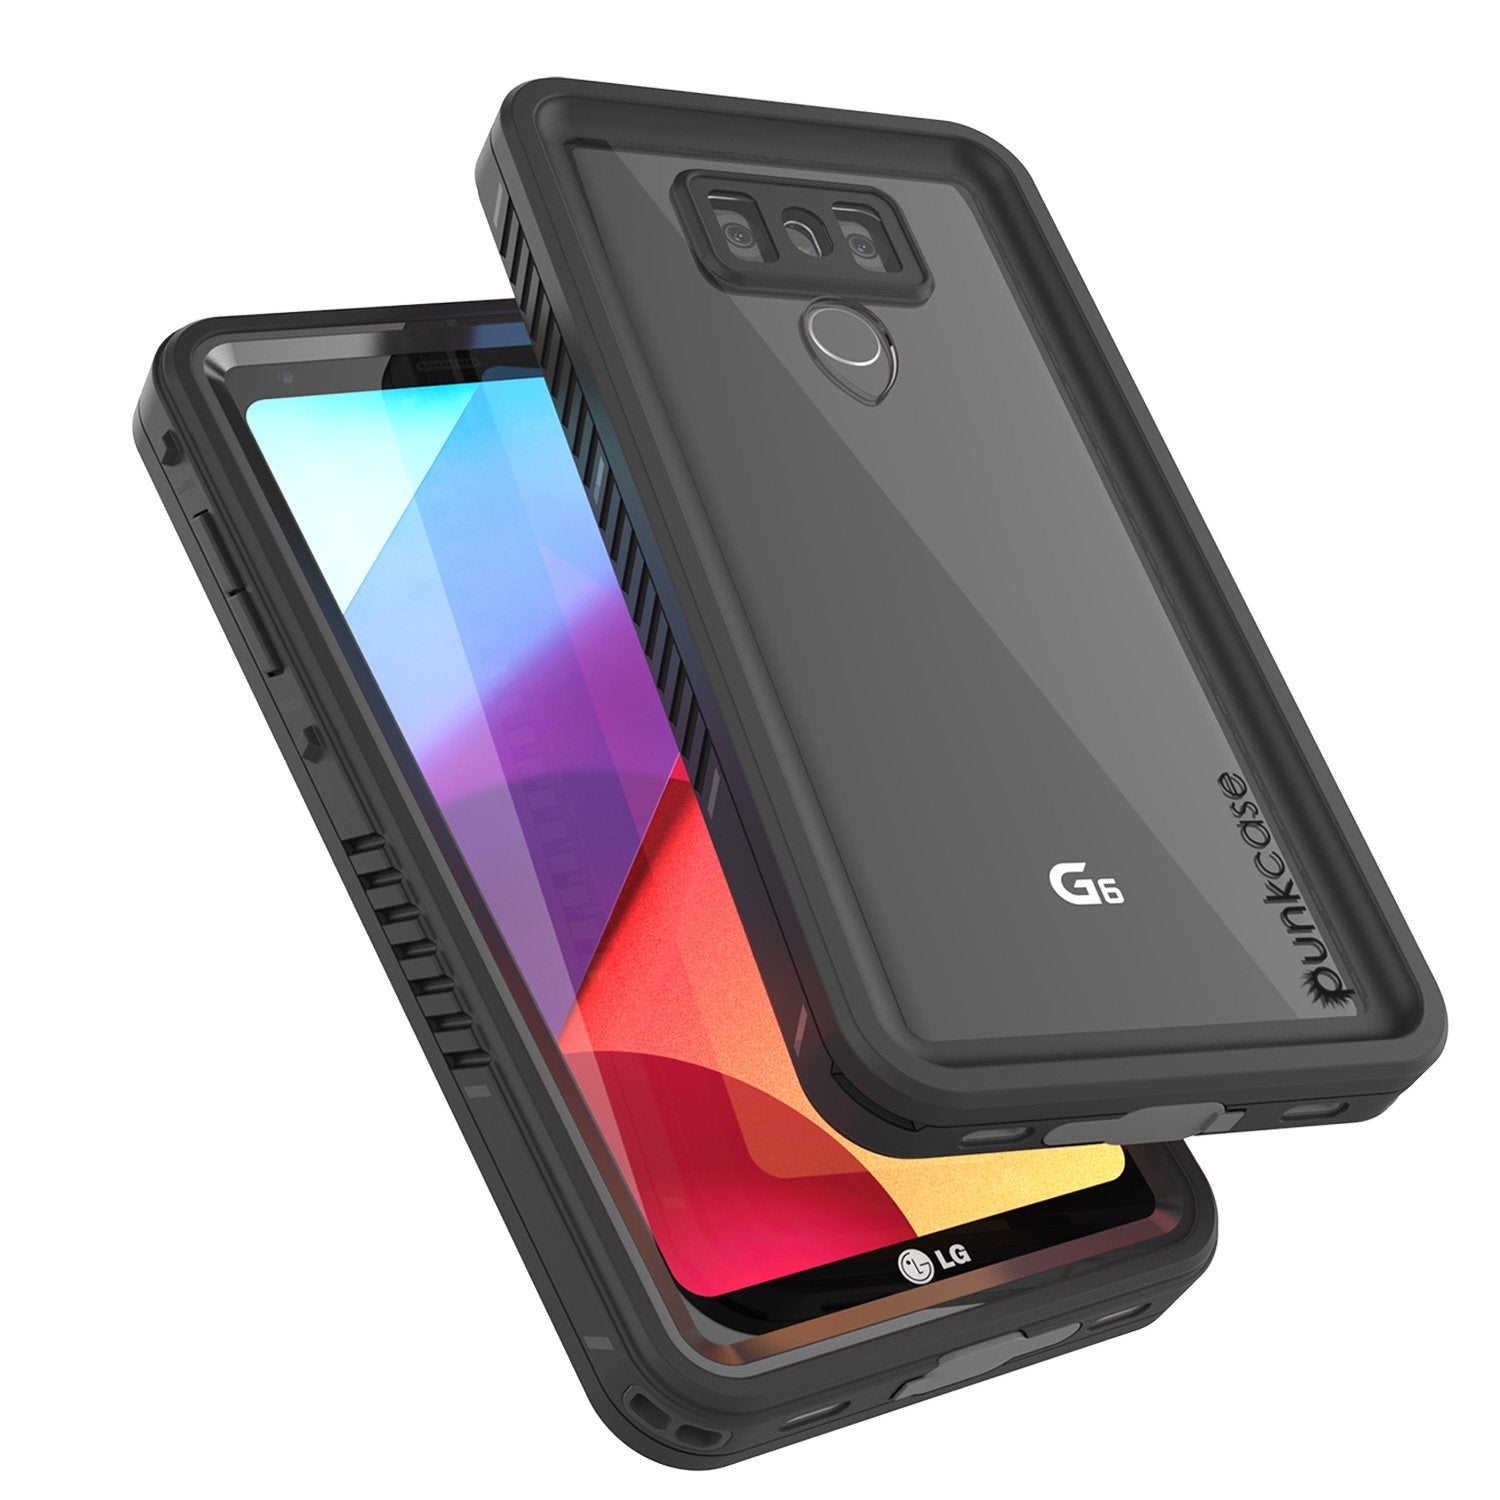 LG G6 Waterproof Case, Punkcase [Extreme Series] [Slim Fit] [IP68 Certified] [Shockproof] [Snowproof] [Dirproof] Armor Cover W/ Built In Screen Protector for LG G6 [BLACK] - PunkCase NZ